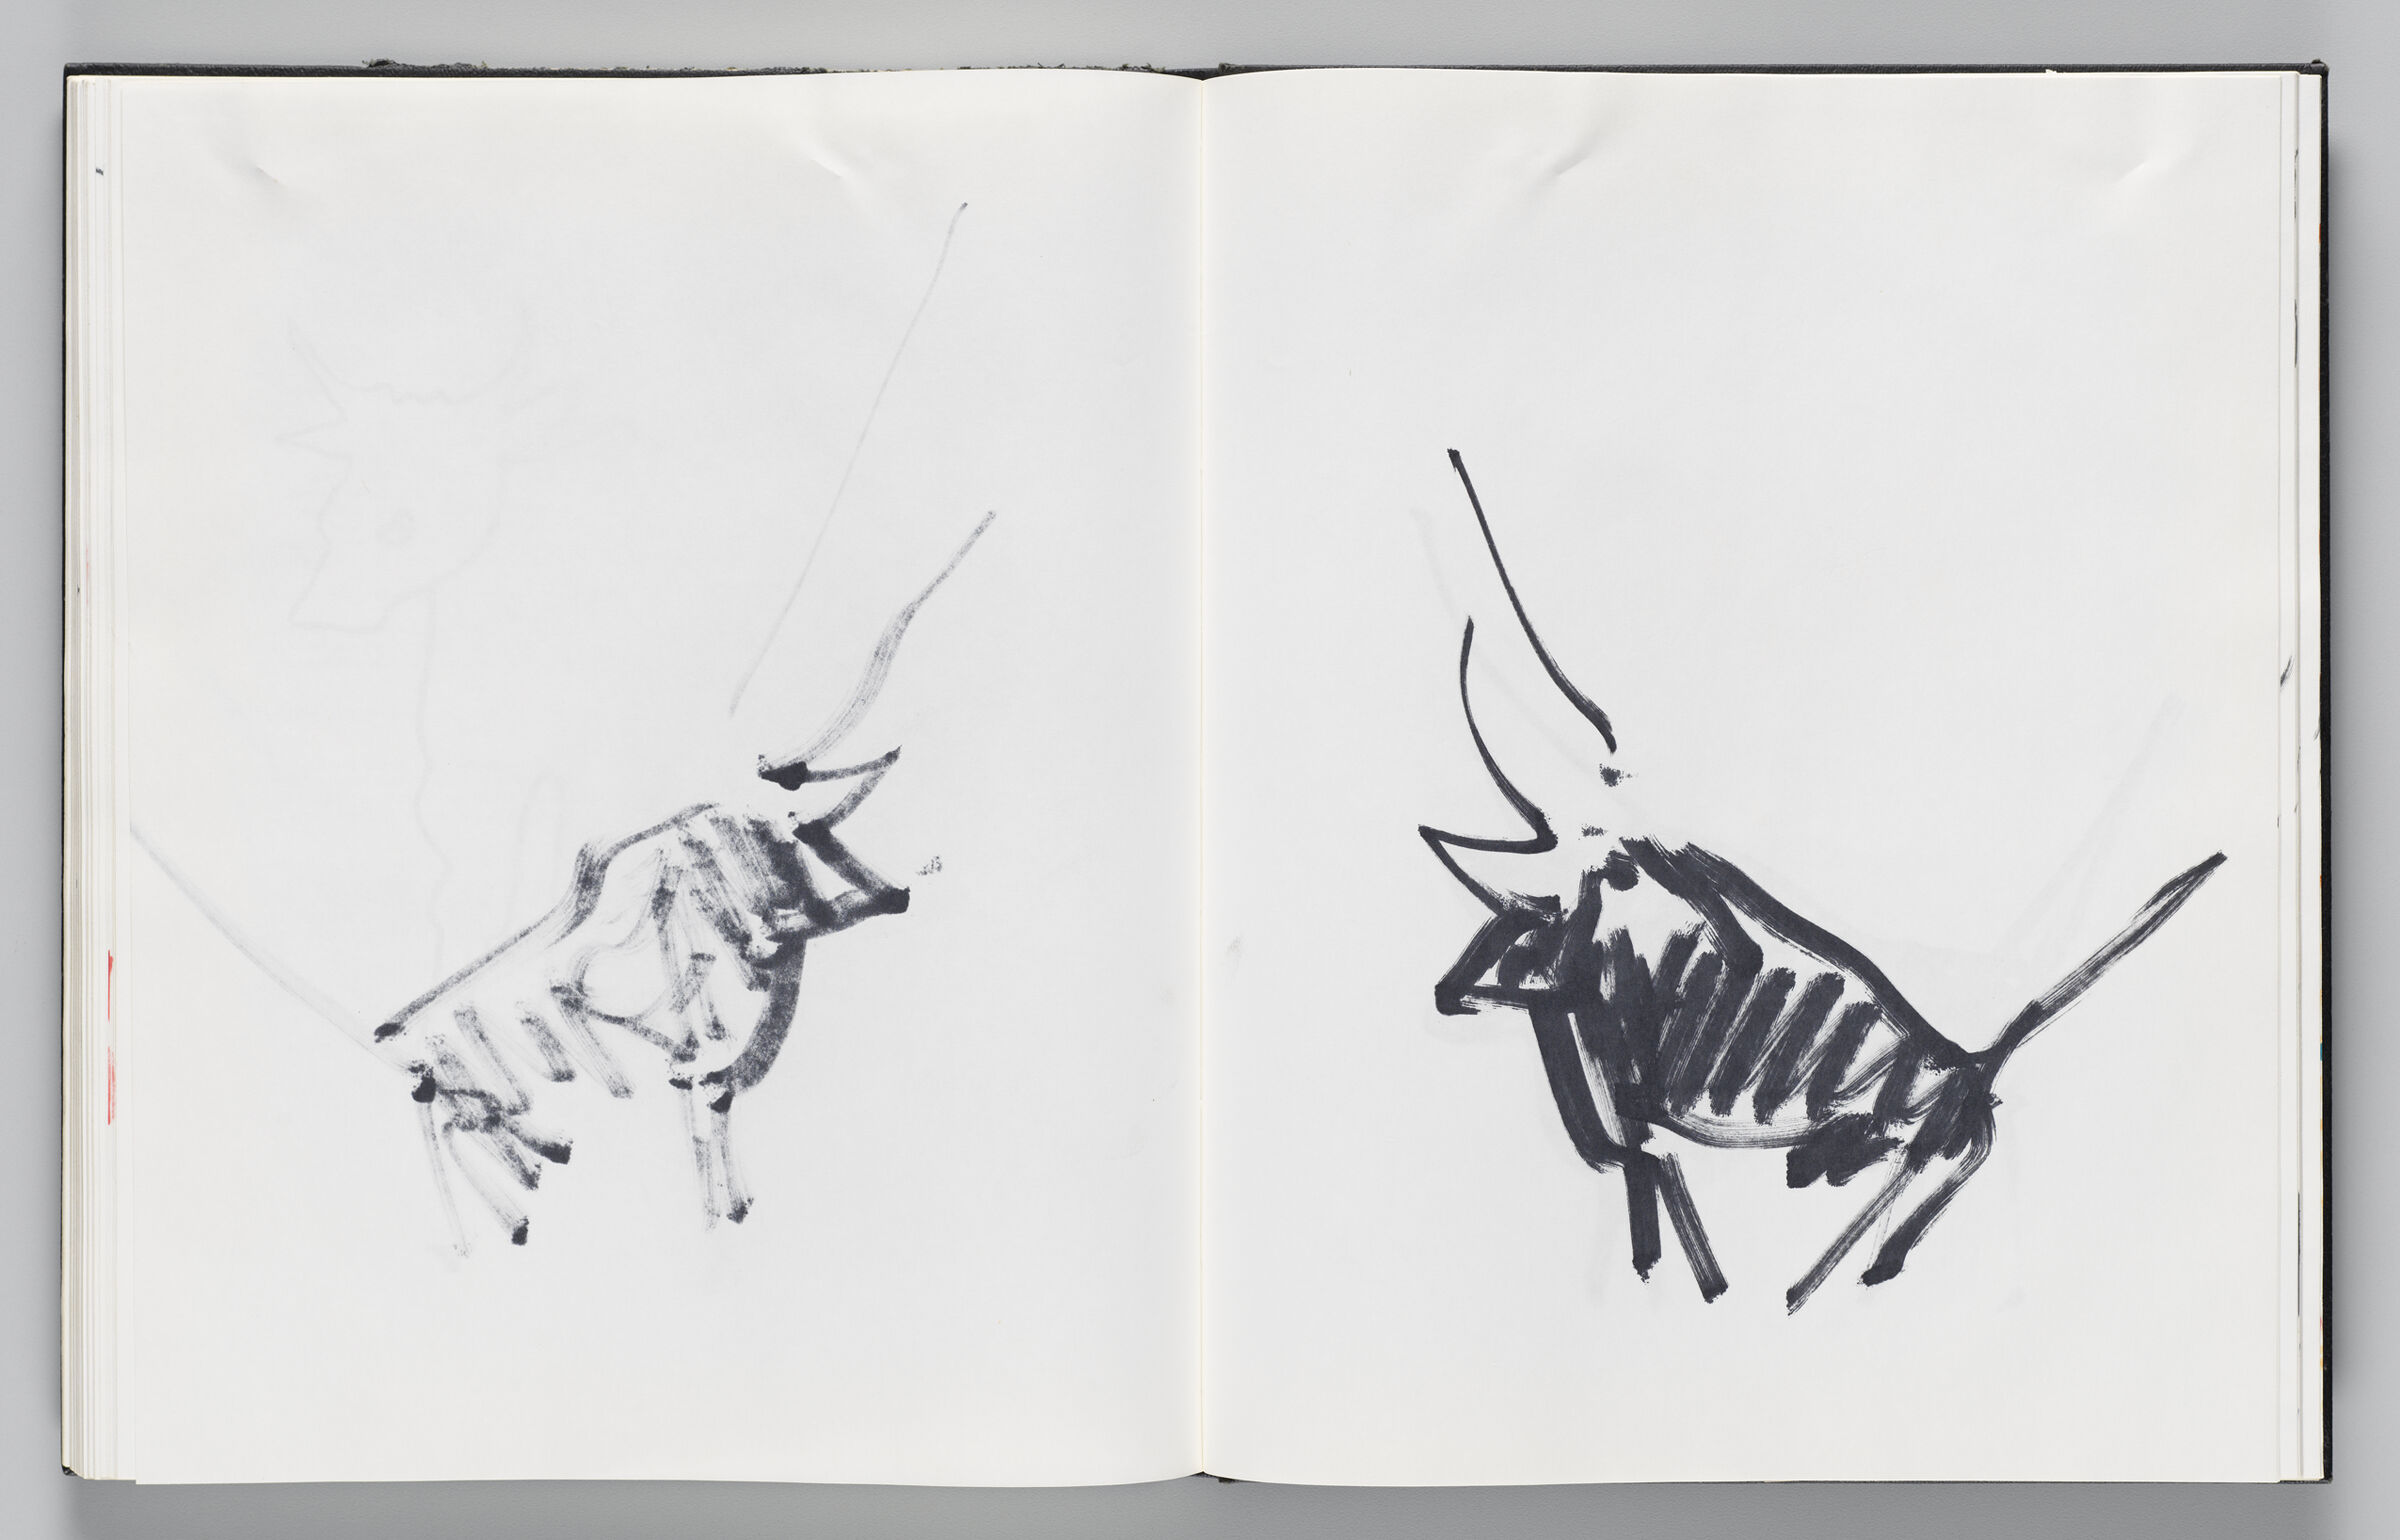 Untitled (Bleed-Through Of Previous Page, Left Page); Untitled (Minatour In Profile, Right Page)